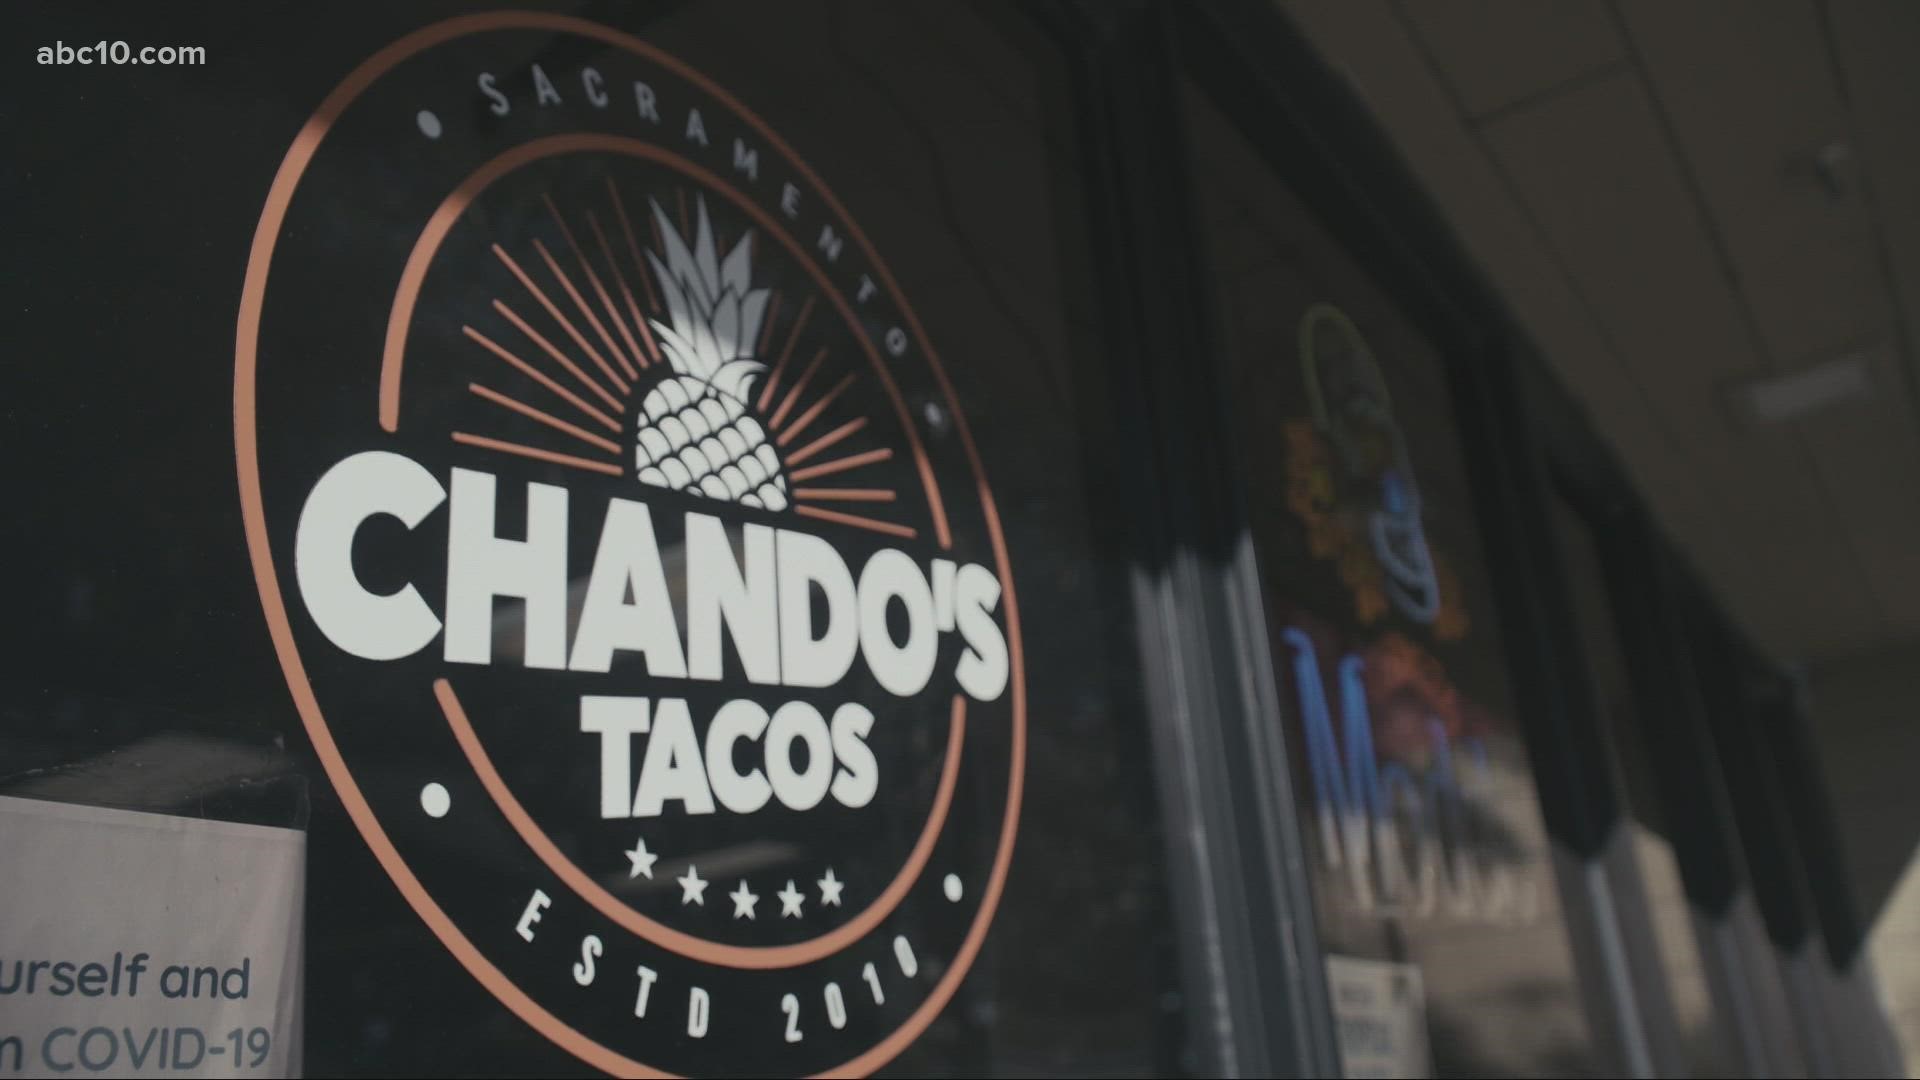 ABC10's Van Tieu spoke with the owner of Sacramento-based restaurant Chando's Tacos, Lisandro “Chando” Madrigal, about his inspiration.